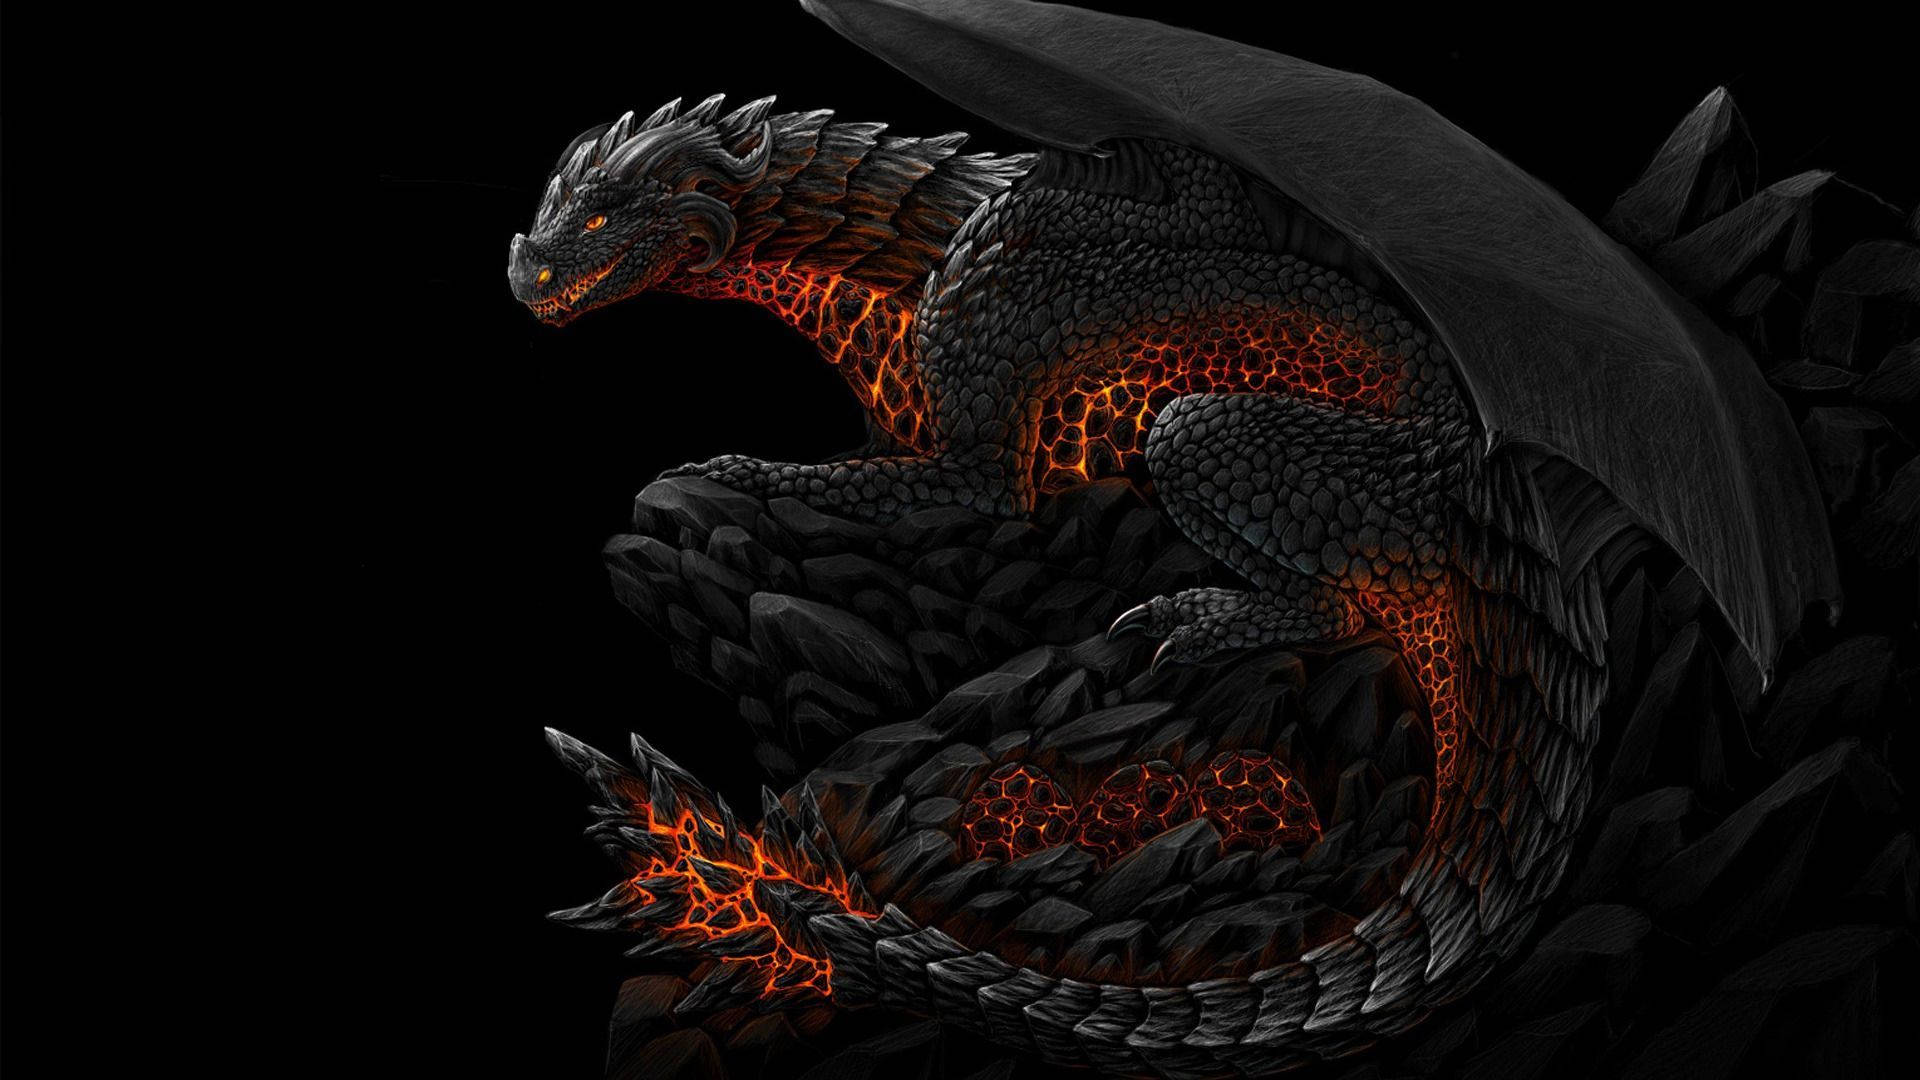 Cool Black And Red Dragon